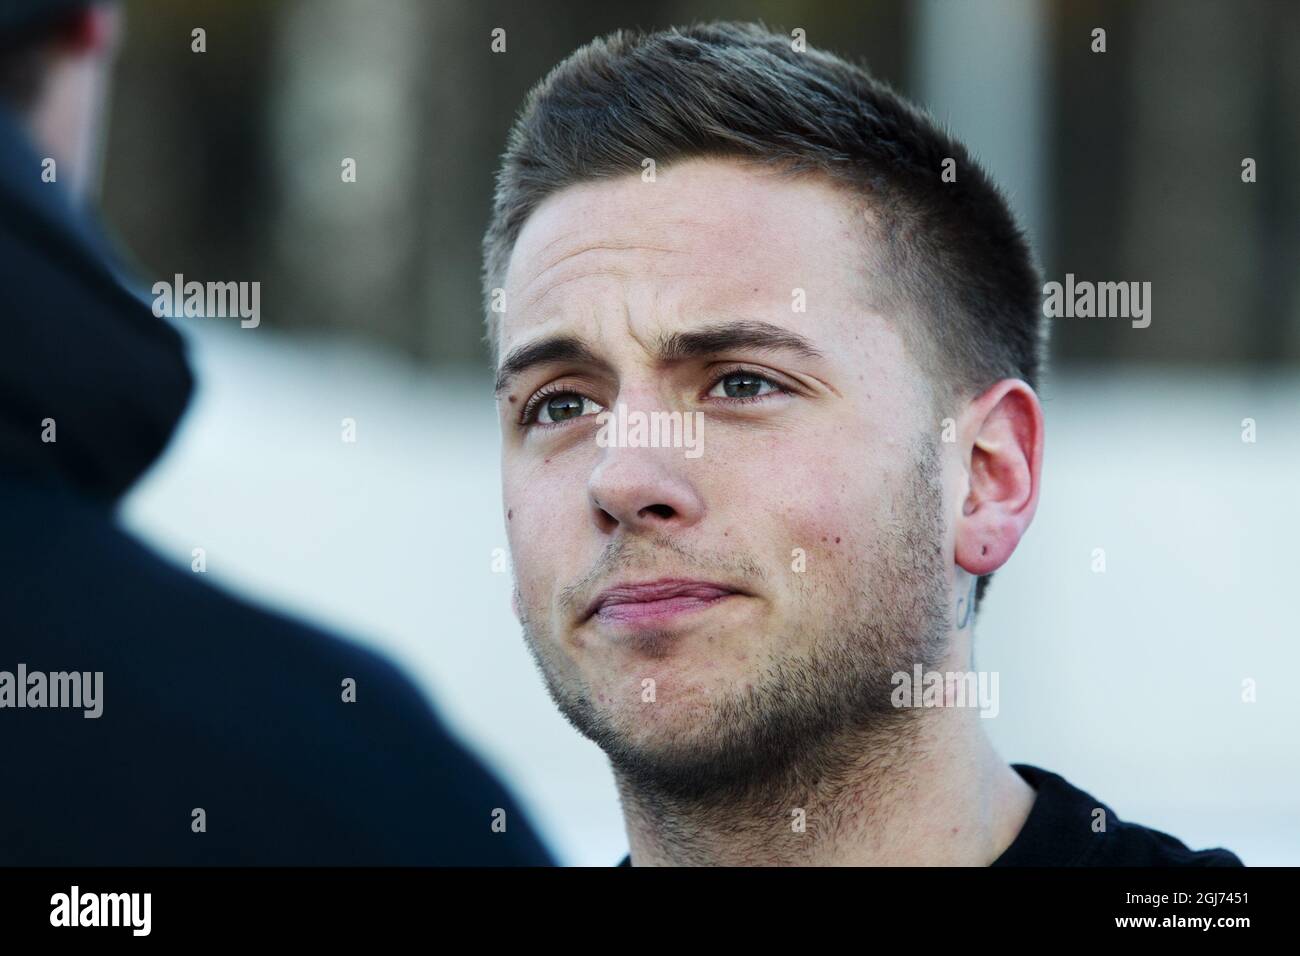 Anton Hysen, 20, is seen after a training at his division 2 soccer club 'Utsikten' in Gothenburg. Sweden. Anton went public with his homosexuality this week as the first Swedish soccer player. Anton's father Glenn and brother Tobbe both played in the national team and Glenn is also head coach of team Utsikten. Stock Photo